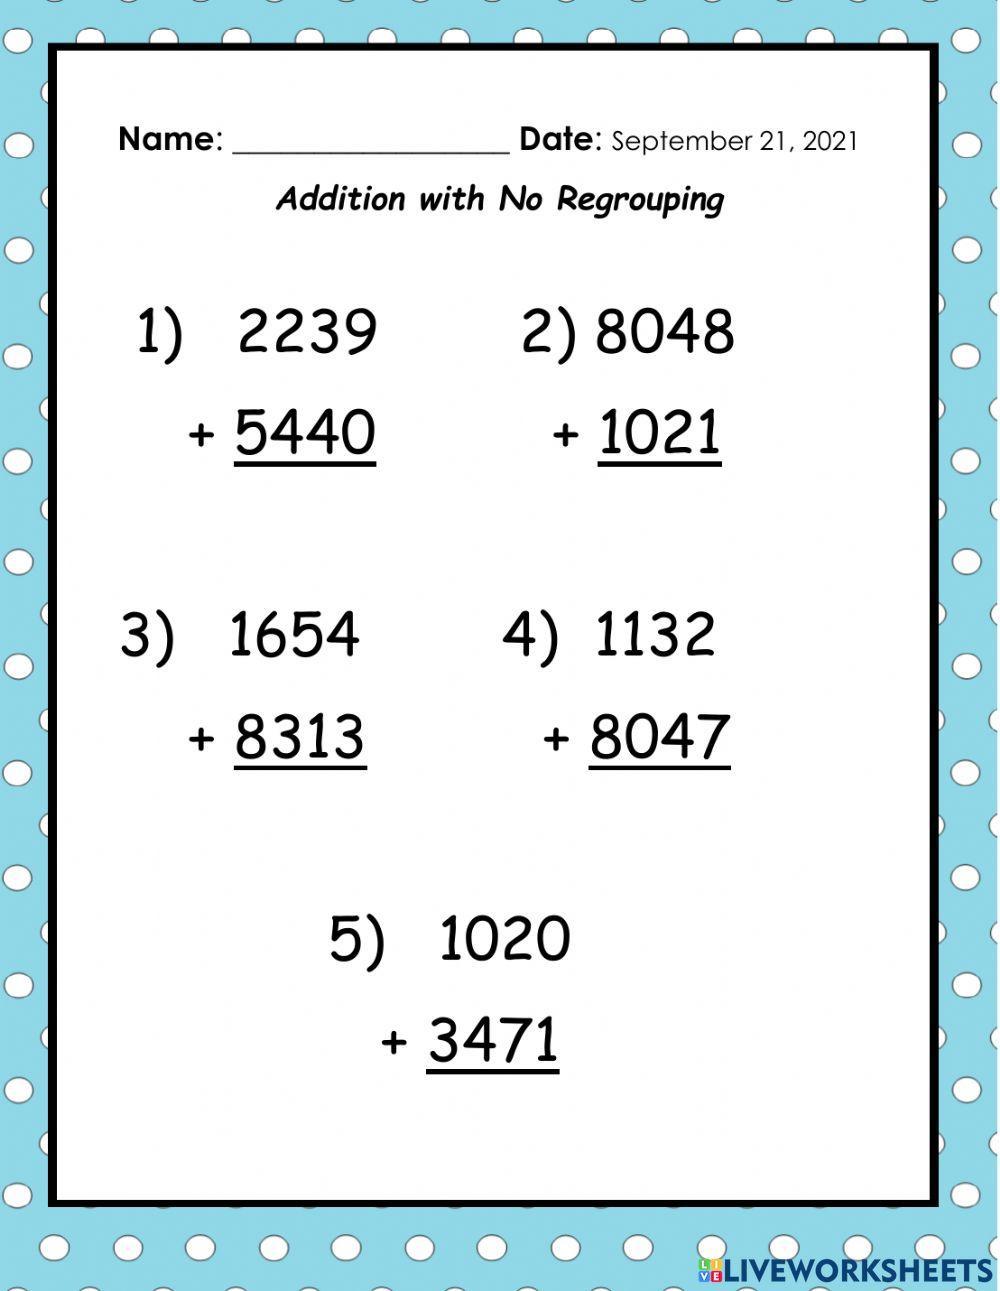 Addition with No Regrouping